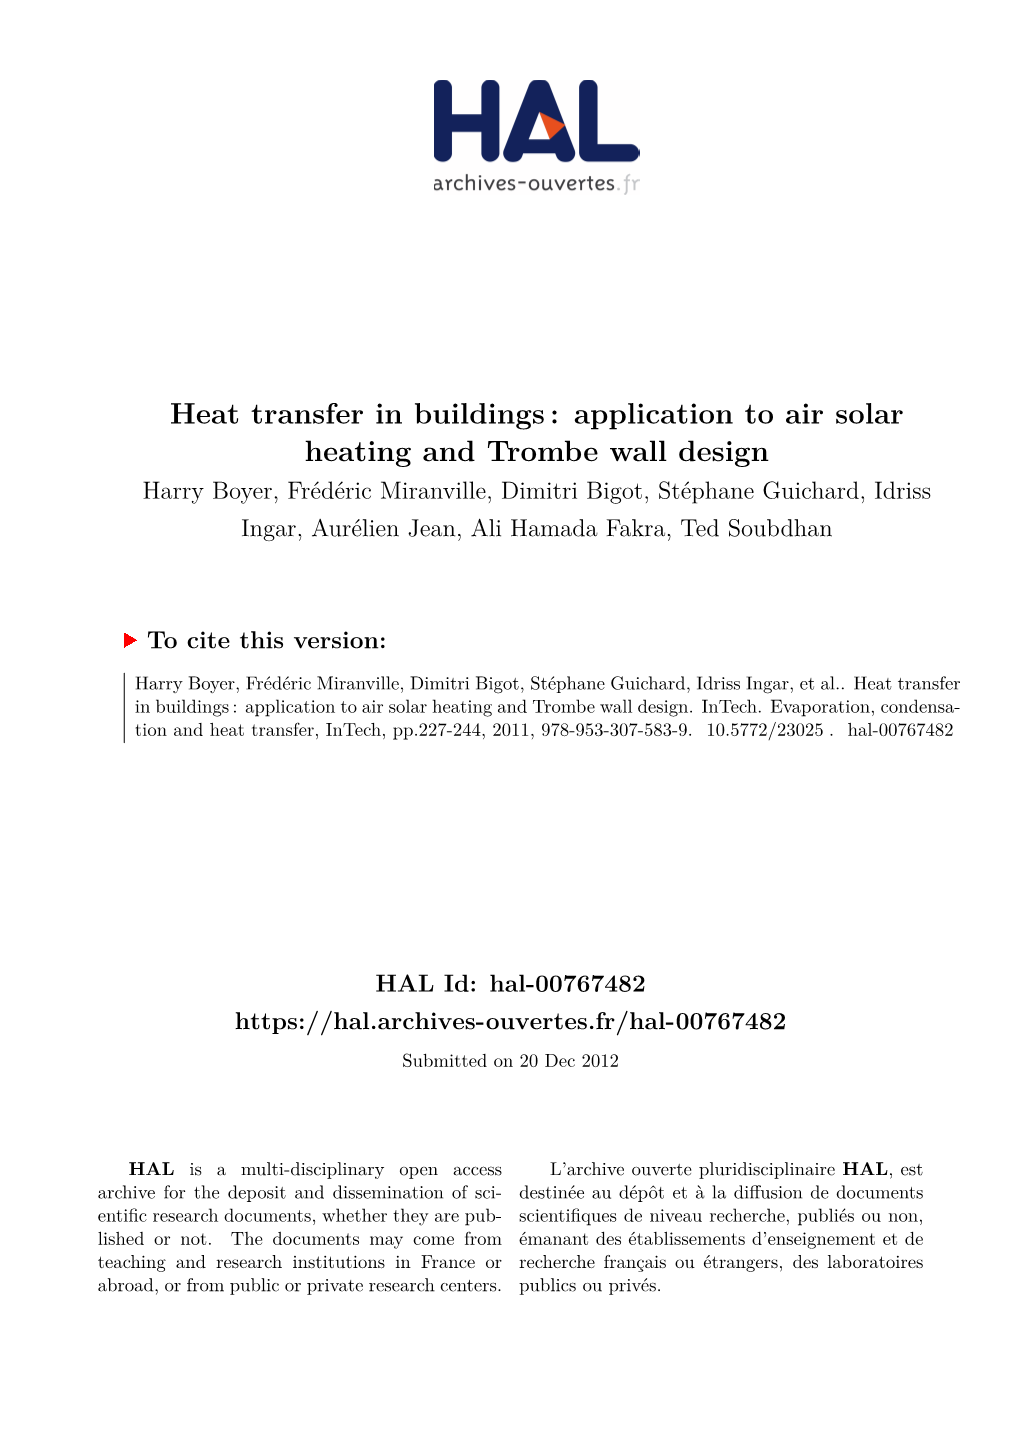 Heat Transfer in Buildings: Application to Air Solar Heating and Trombe Wall